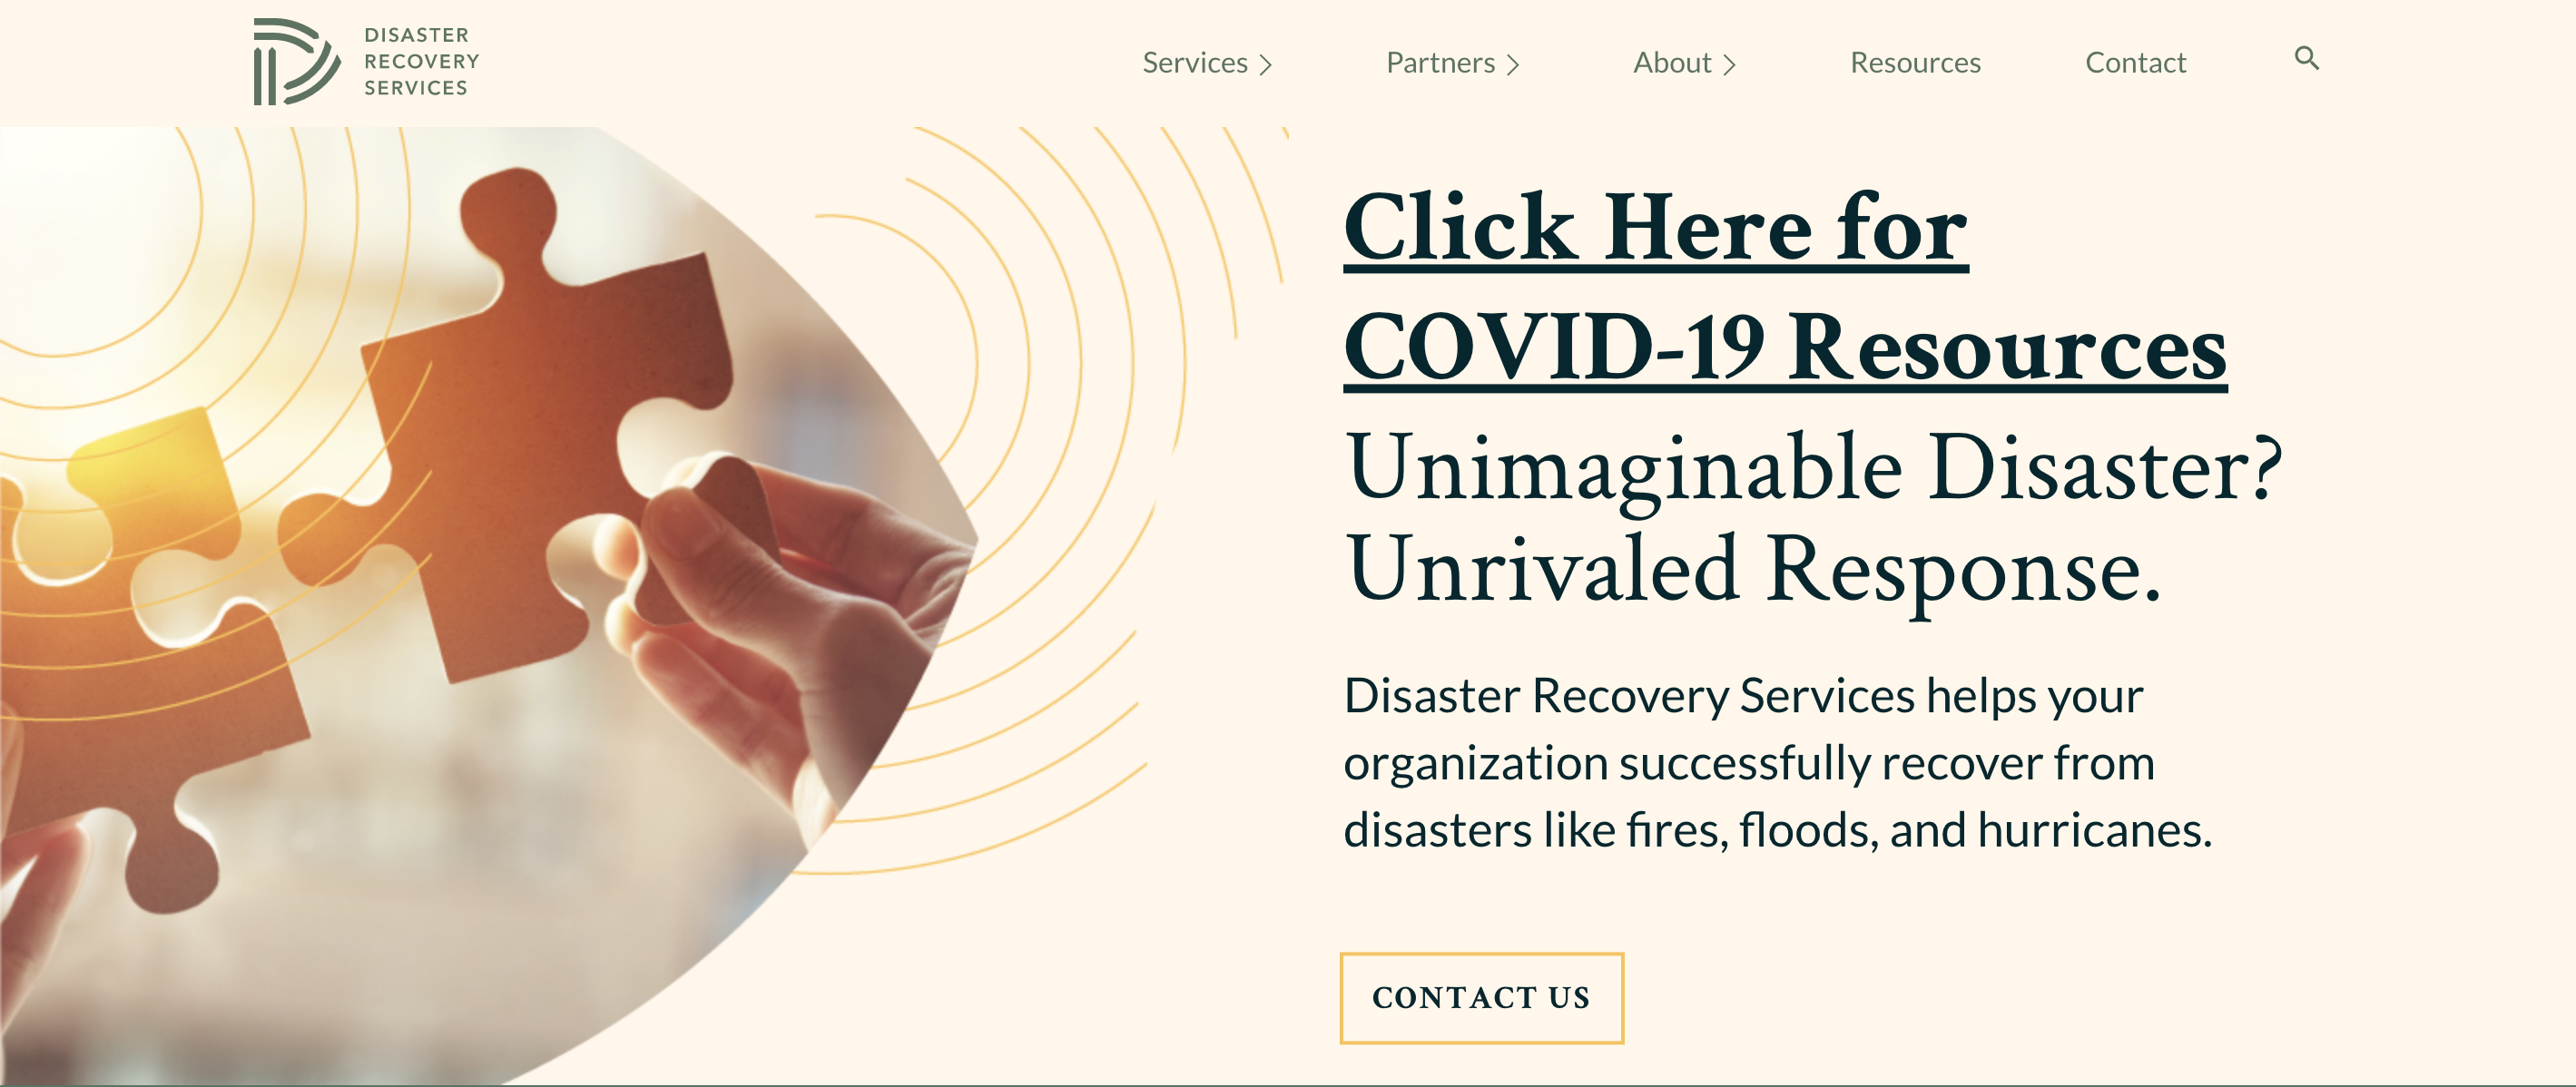 The New Disaster Recovery Service website.